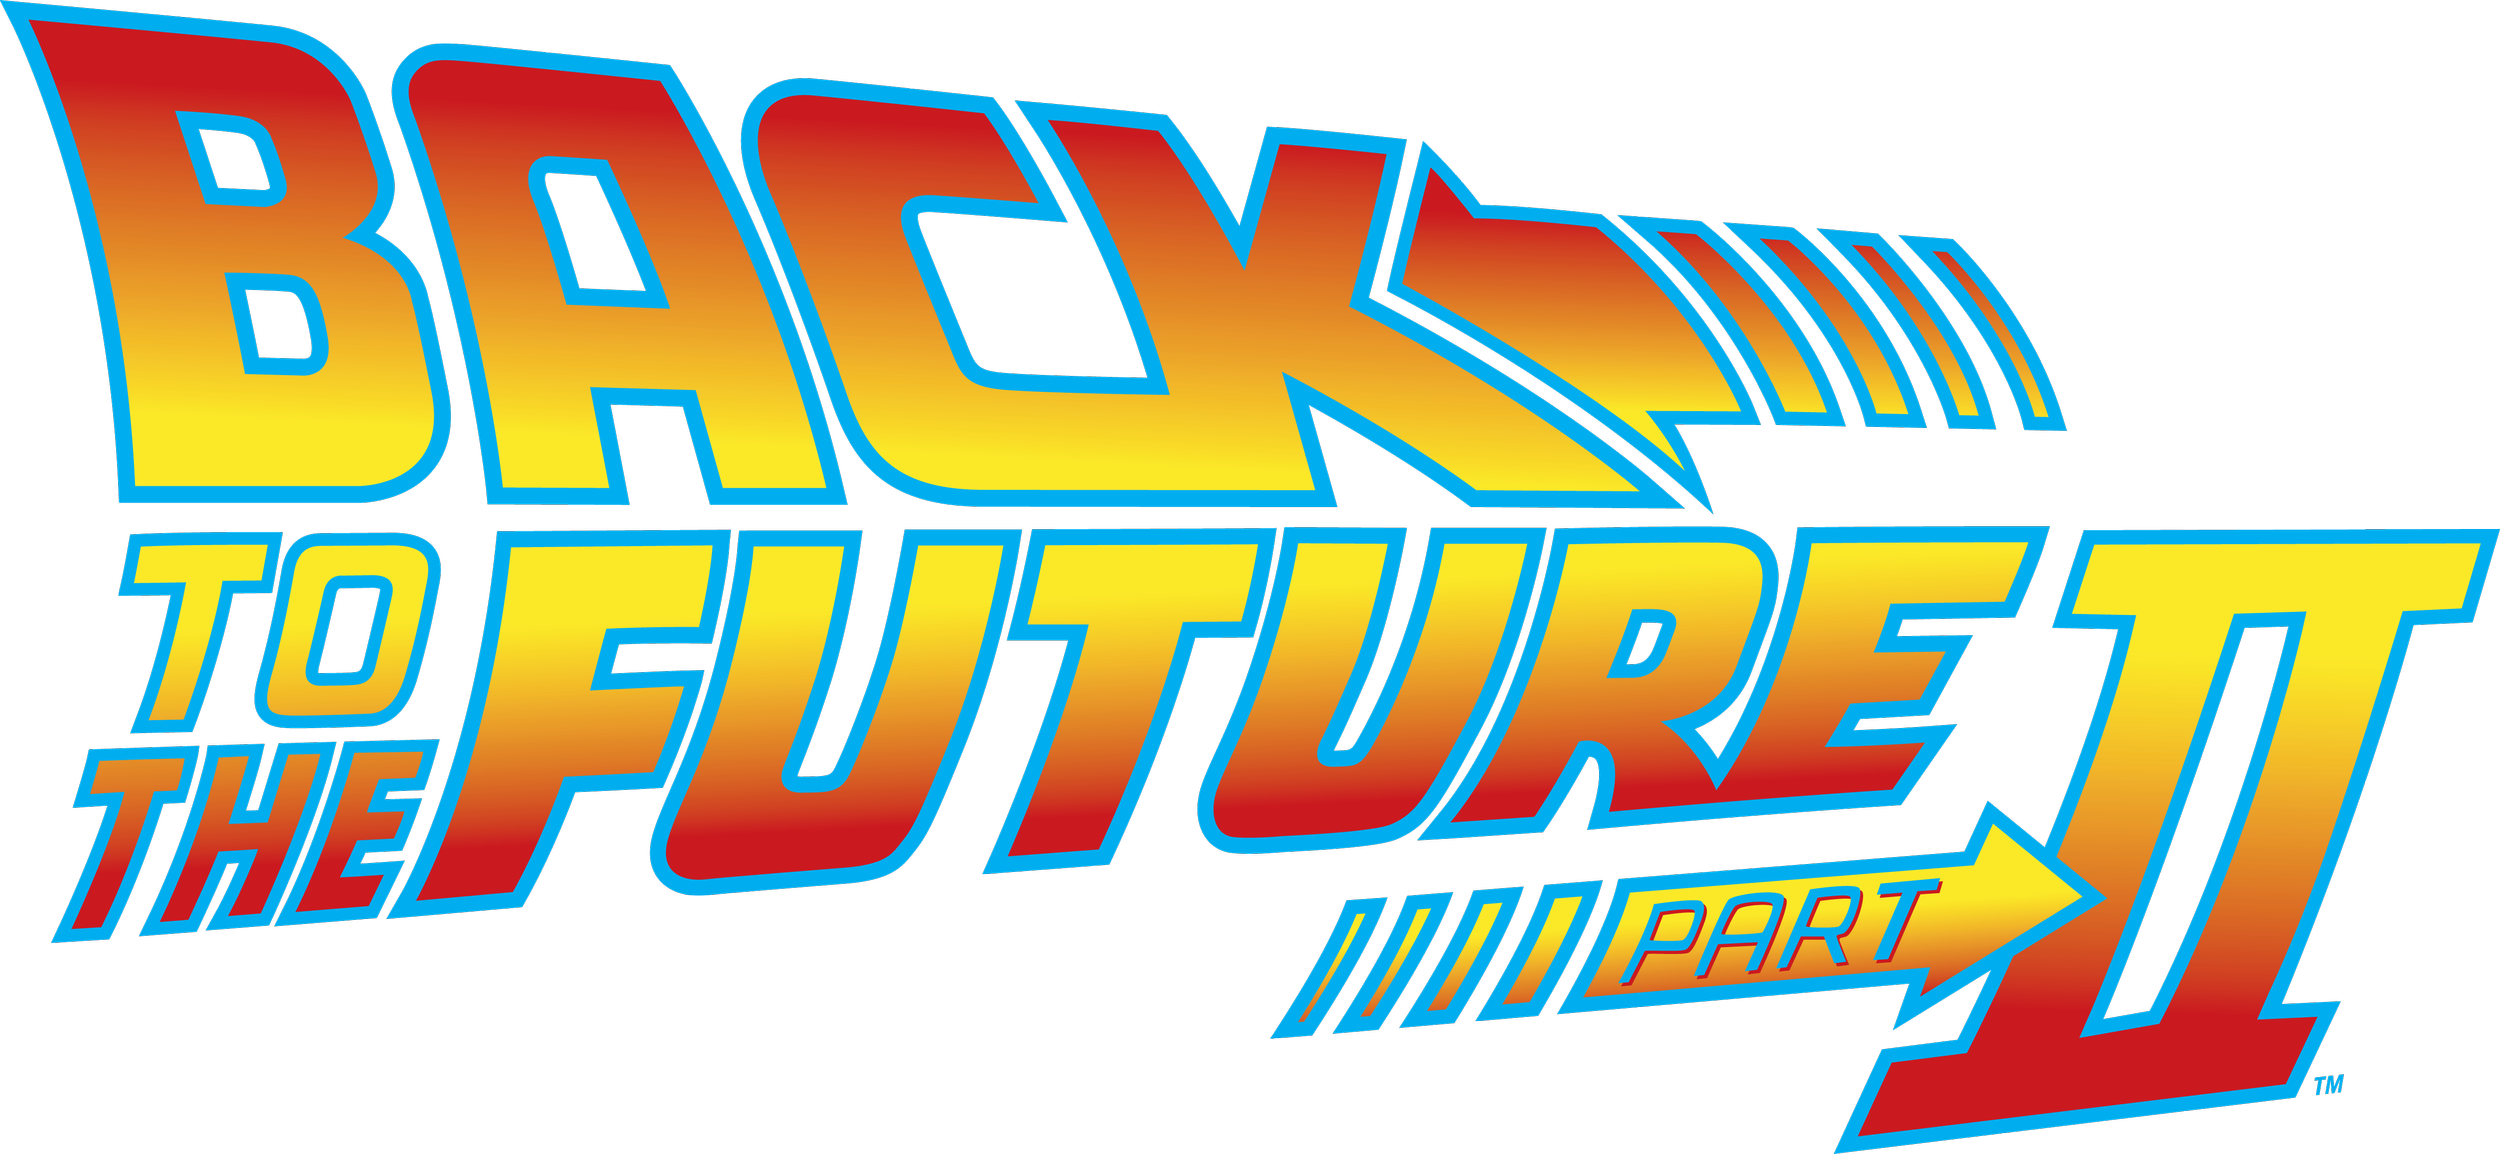 Back to the Future Part II': Welcome to the Present